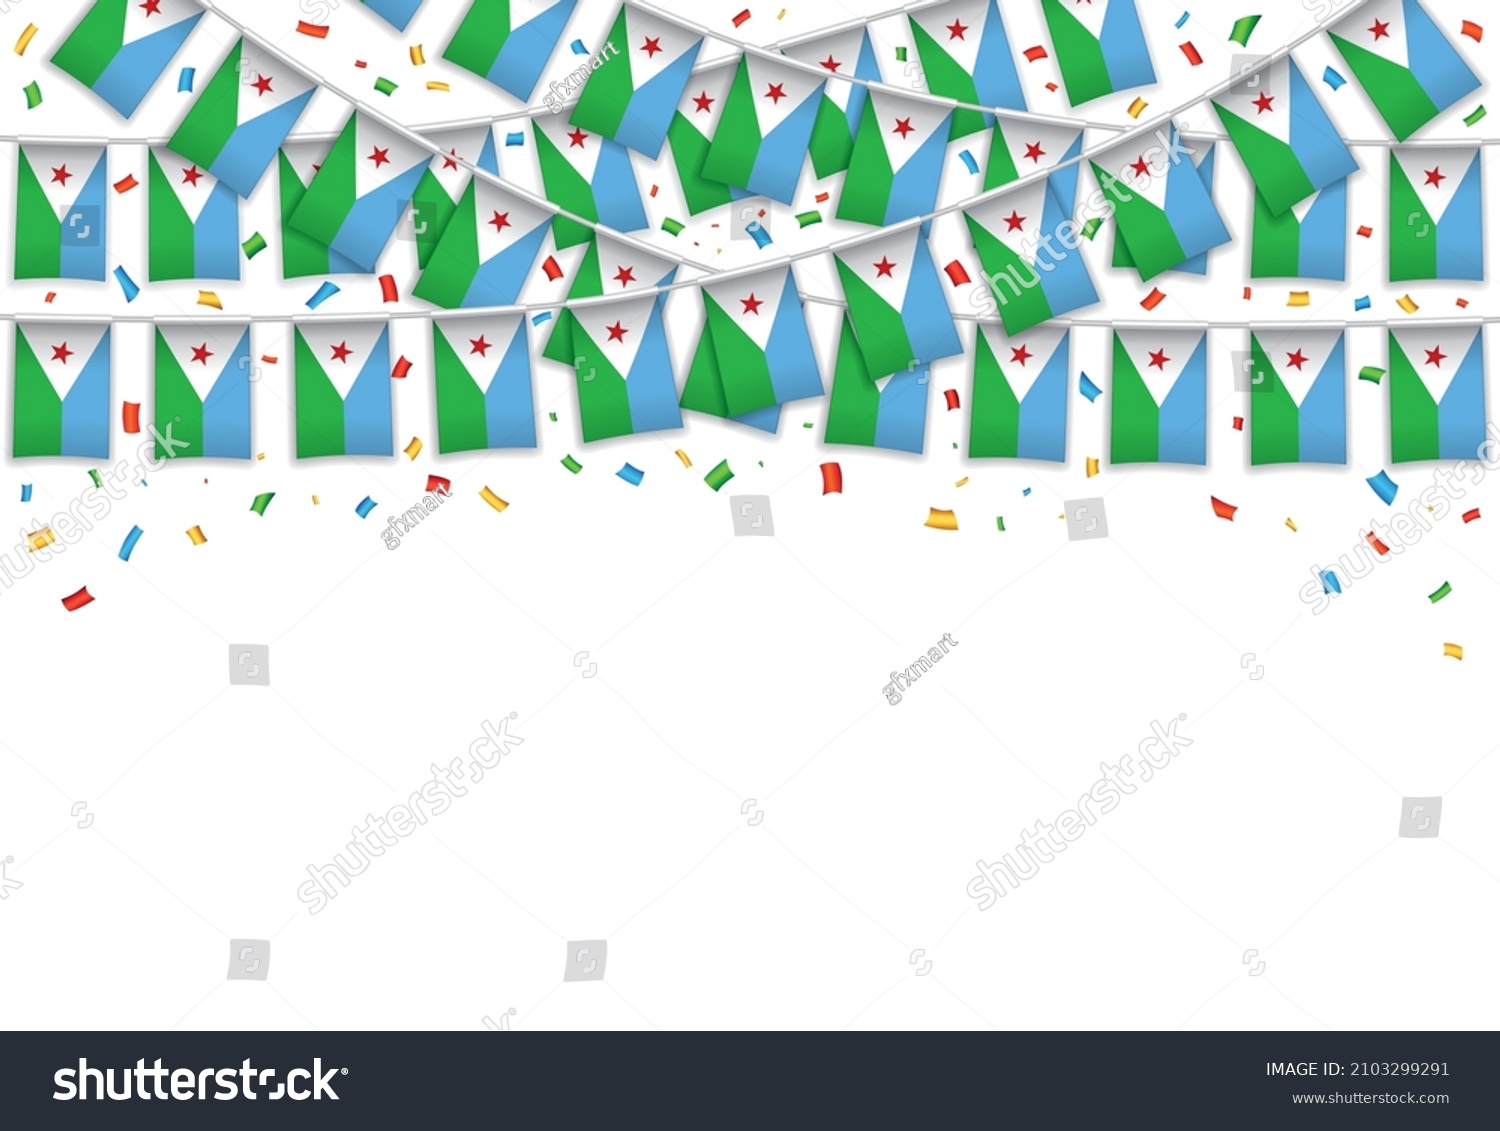 SVG of Djibouti flag garland white background with confetti, Hang bunting for Djibouti Independence Day celebration template banner, Vector illustration svg